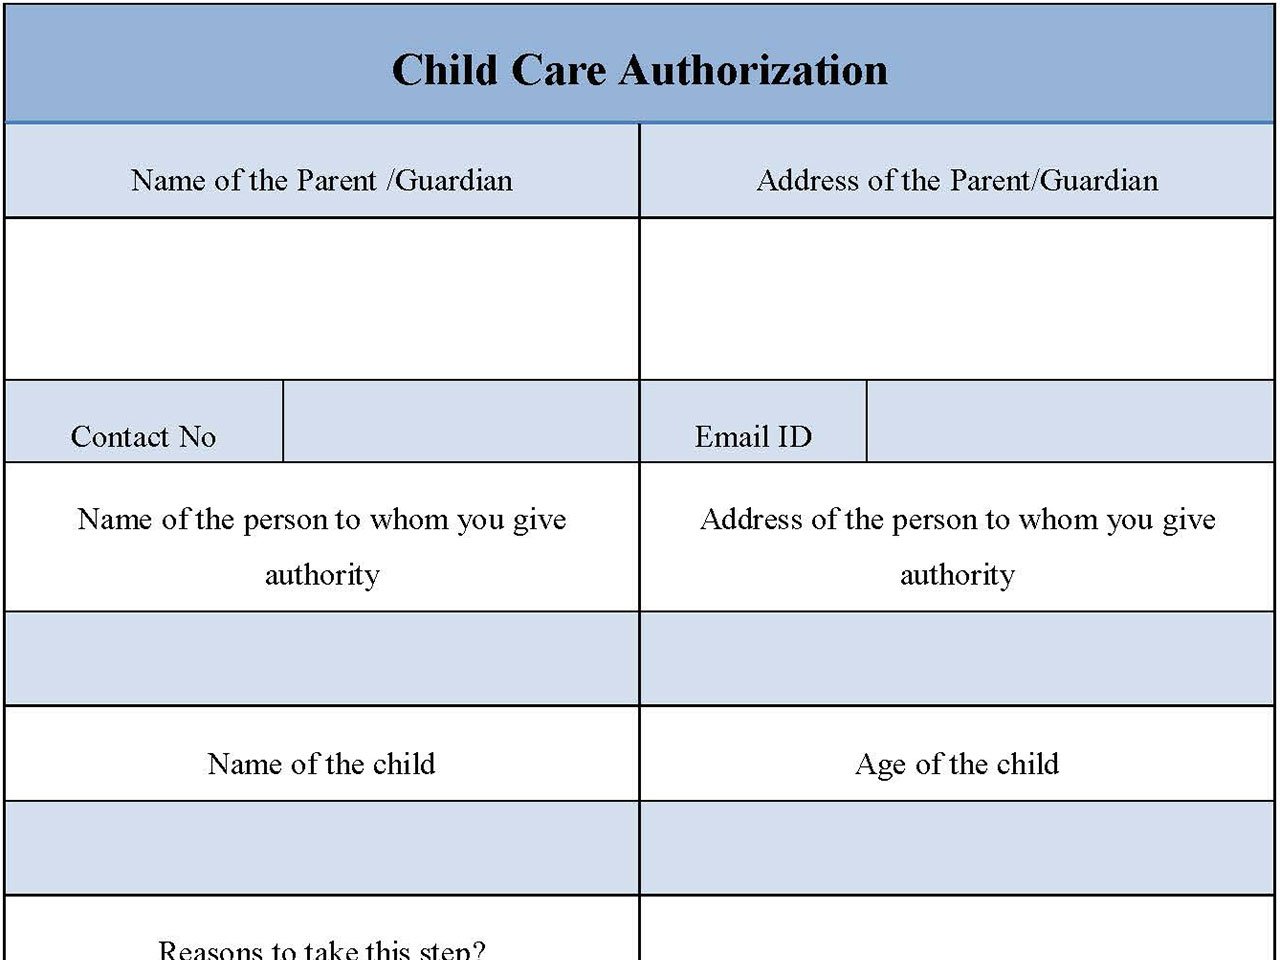 Child care authorization forms